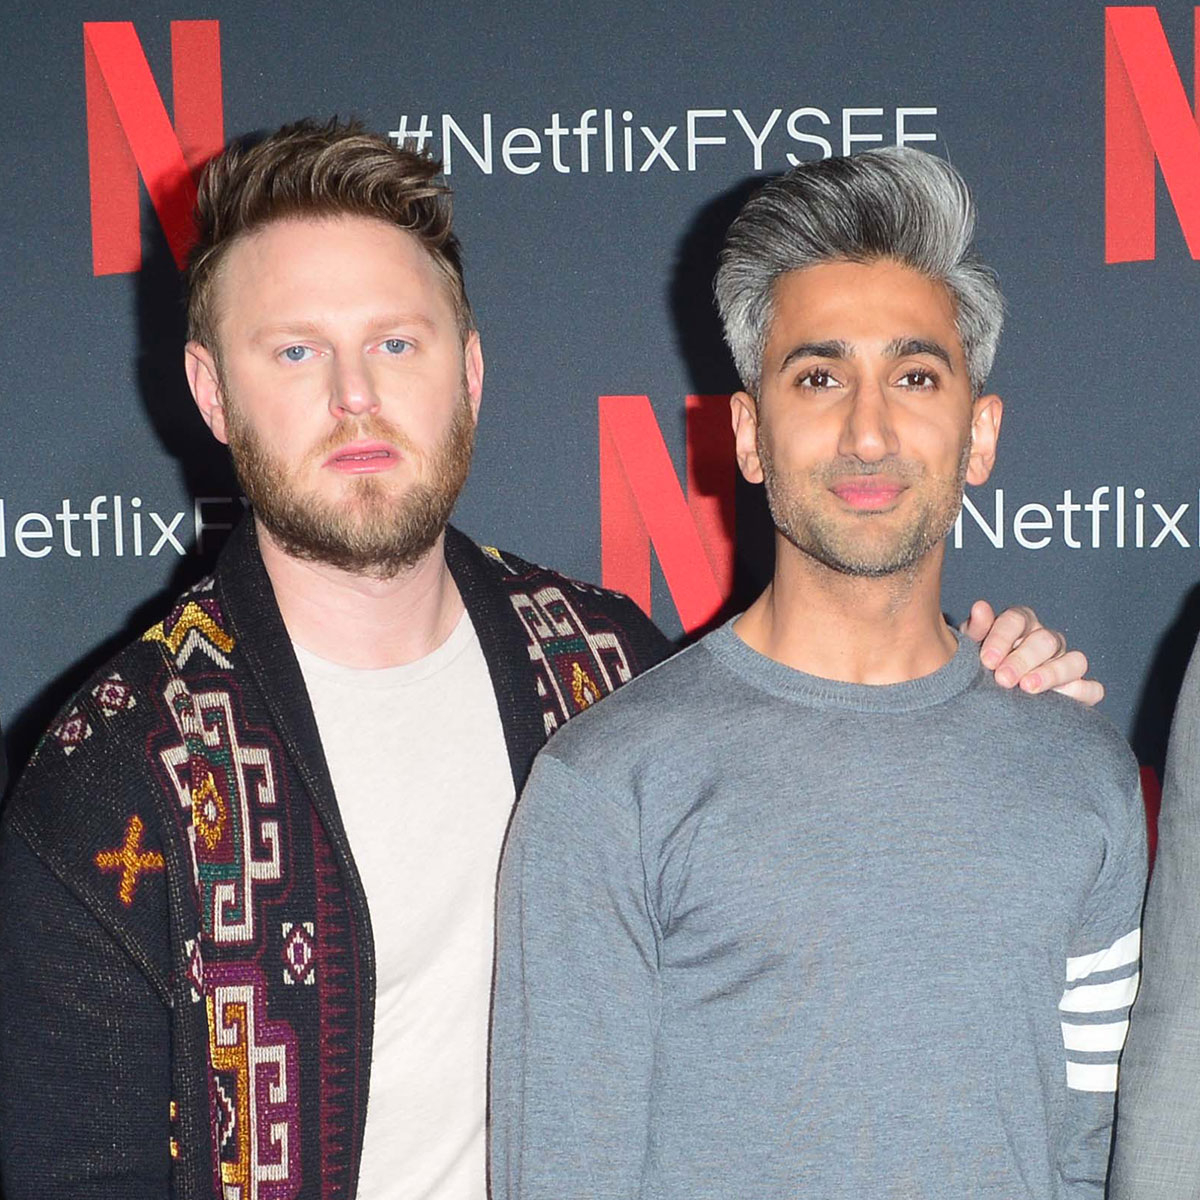 Queer Eye's Tan France Responds to Accusations He Had Bobby Berk Fired From Show